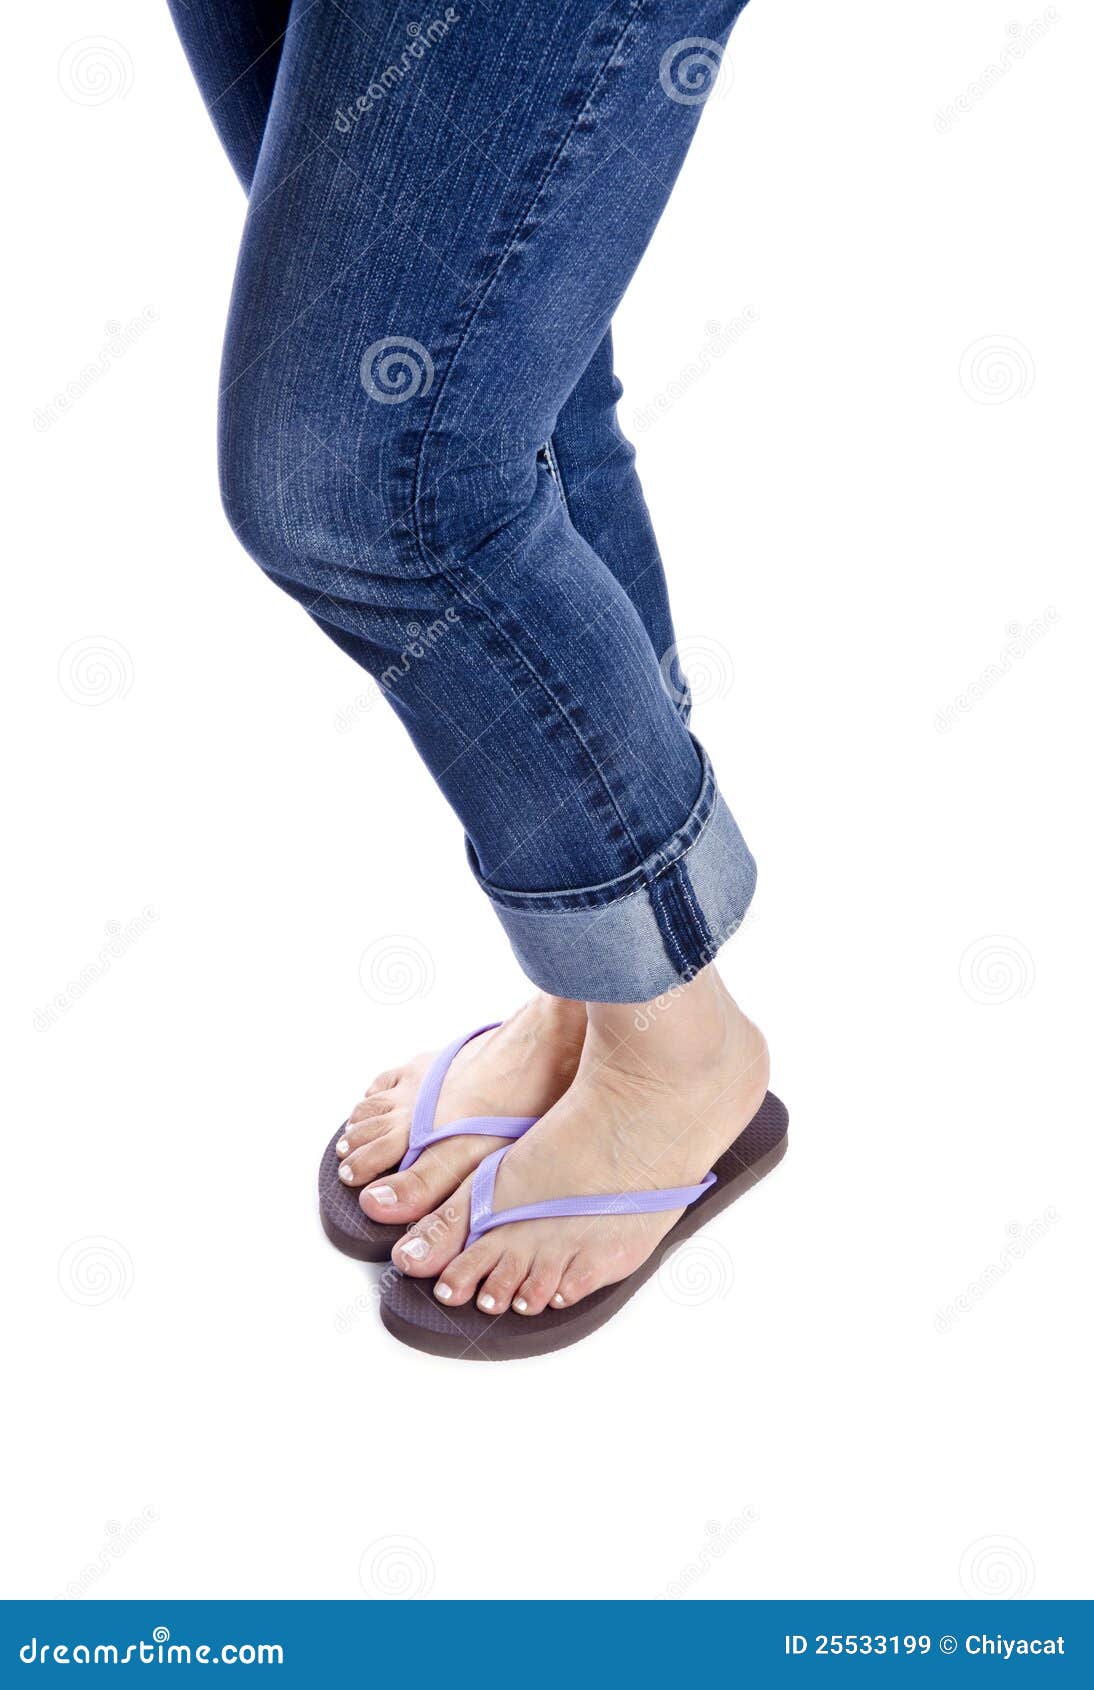 Woman Wearing Blue Jeans and Flip Flops #2 Stock Image - Image of